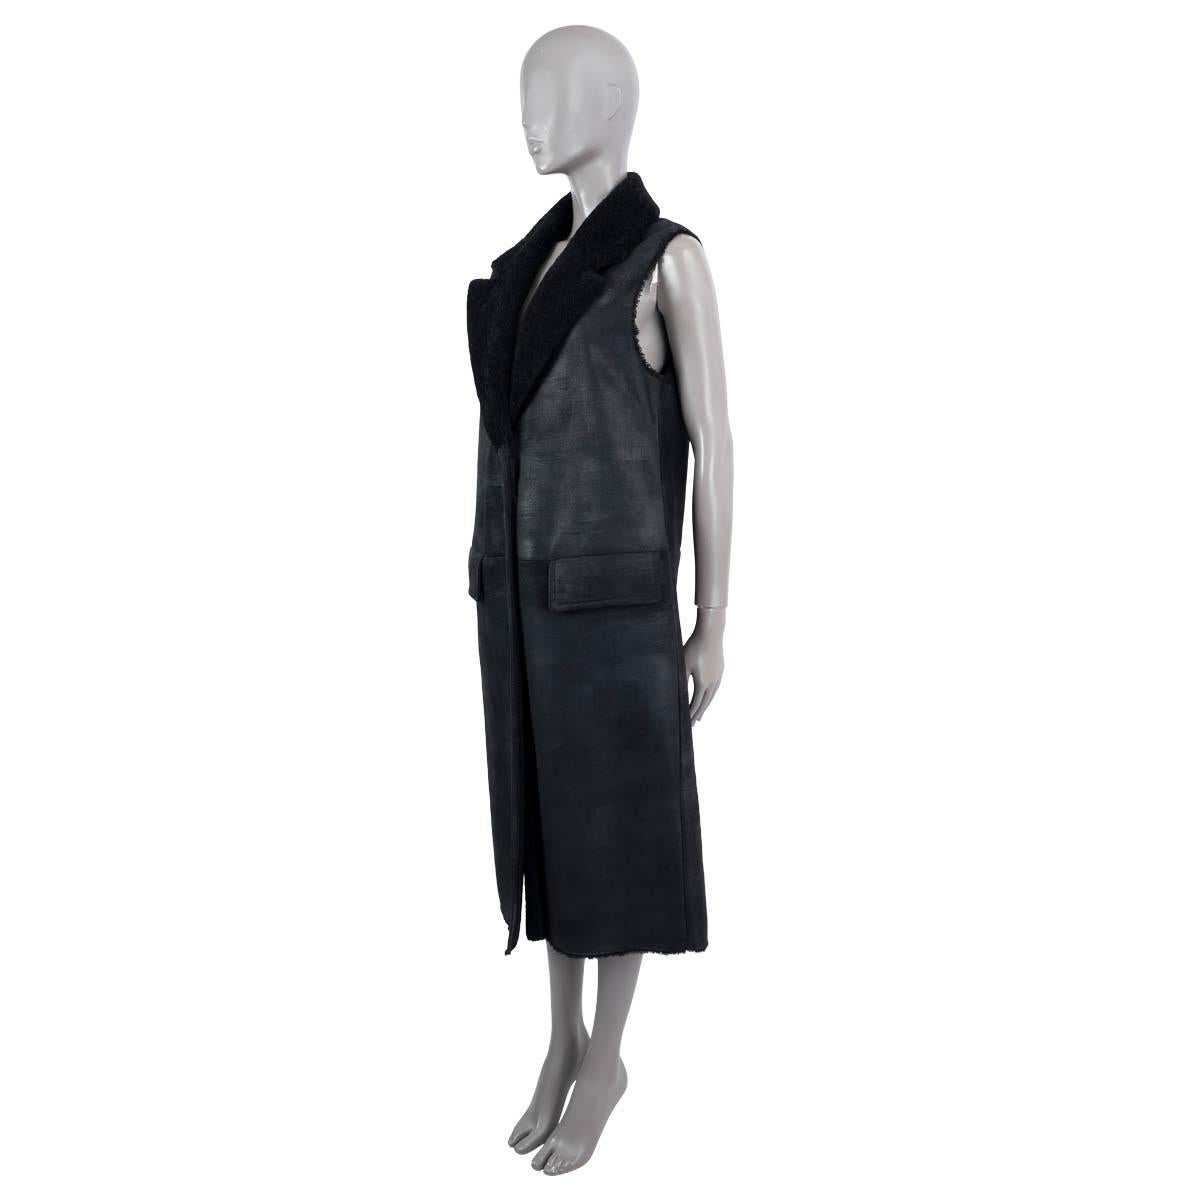 100% authentic Prada 2020 midi-length vest in black shearling with distressed surface. Opens with three buttons on the front, has two front flap pockets and a slit on the back. Has been worn once and is in virtually new condition. 

Measurements
Tag